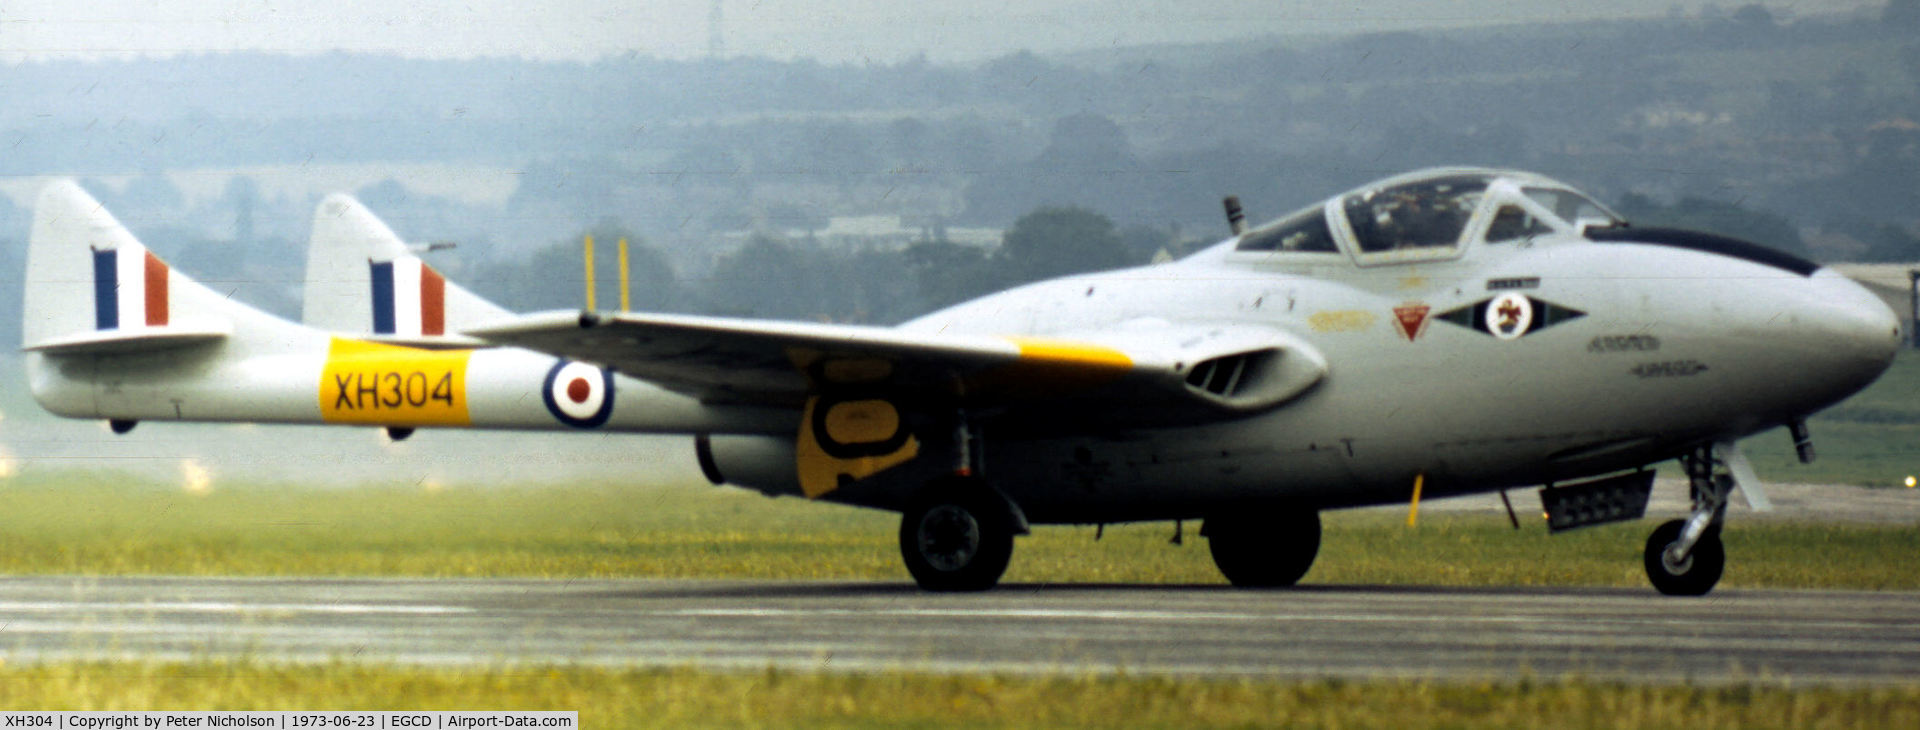 XH304, 1955 De Havilland DH-115 Vampire T.11 C/N 15658, Vampire T.11 of the Central Flying School in action at the 1973 Woodford Airshow.